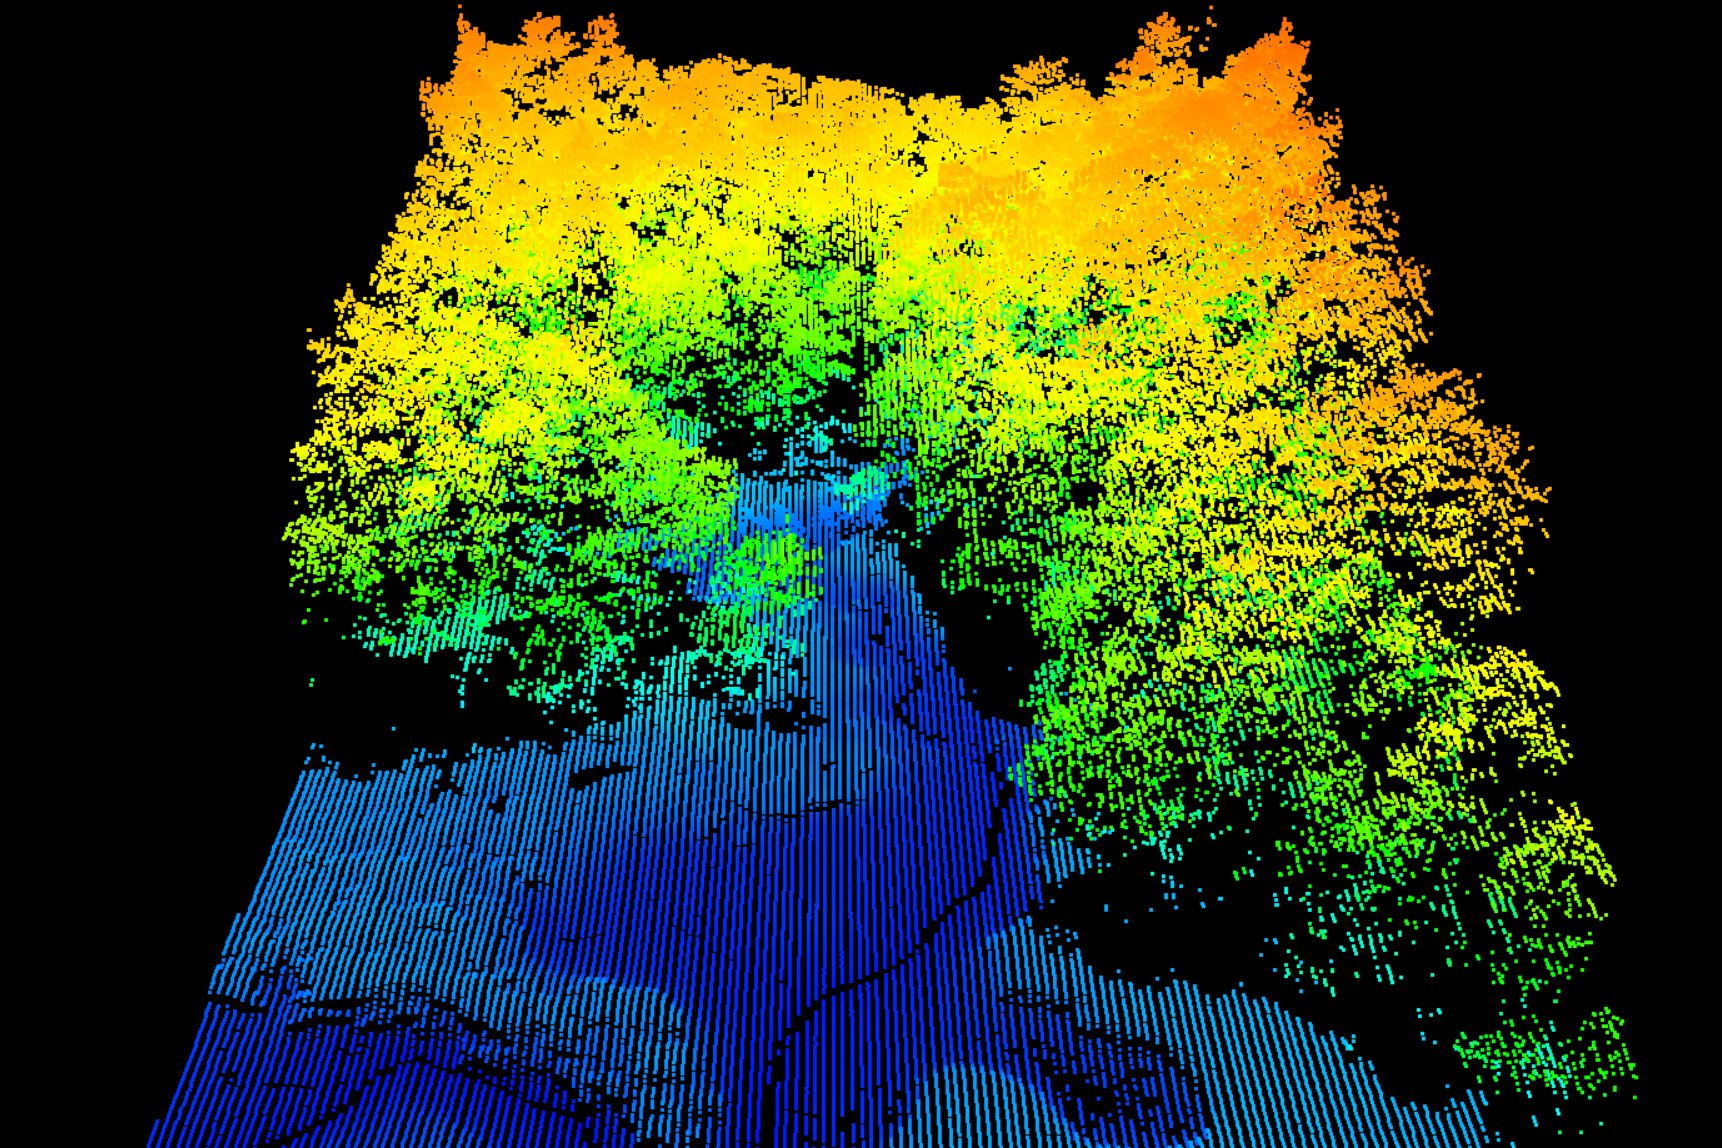 Pachama uses tech like LIDAR to calculate biomass density in the forests their projects protect. Pachama